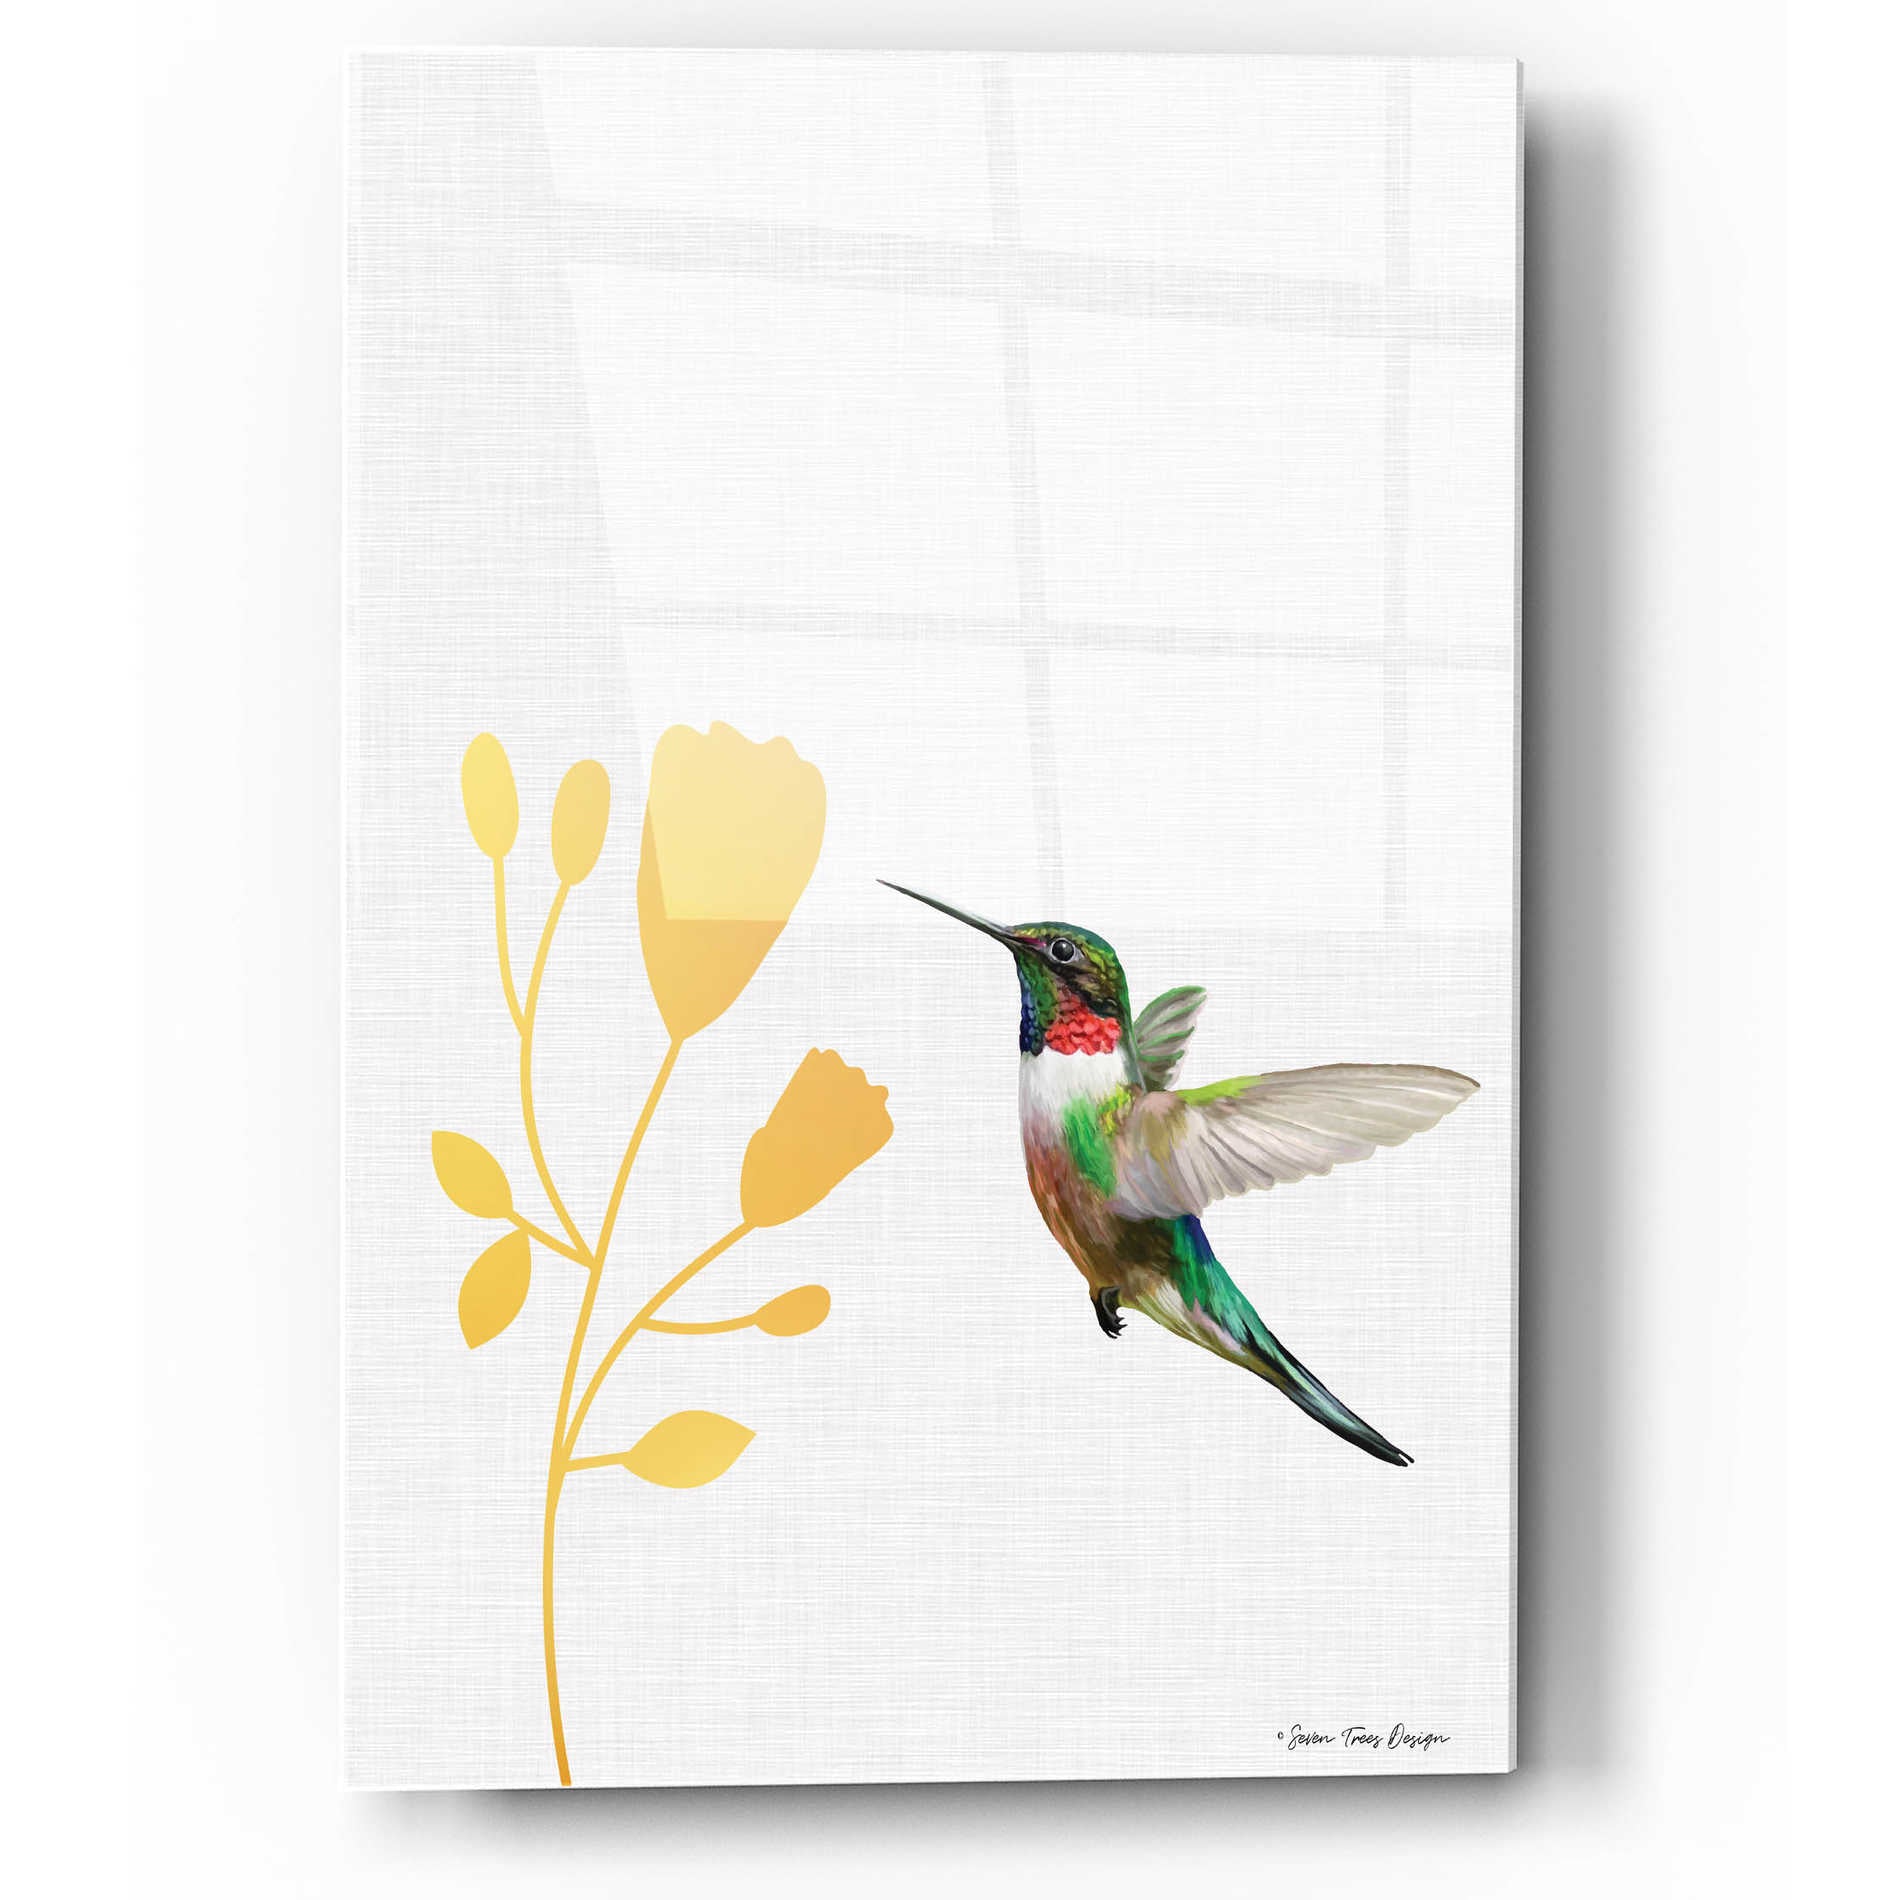 Epic Art 'Hummingbird and the Flower' by Seven Trees Design, Acrylic Glass Wall Art,12x16